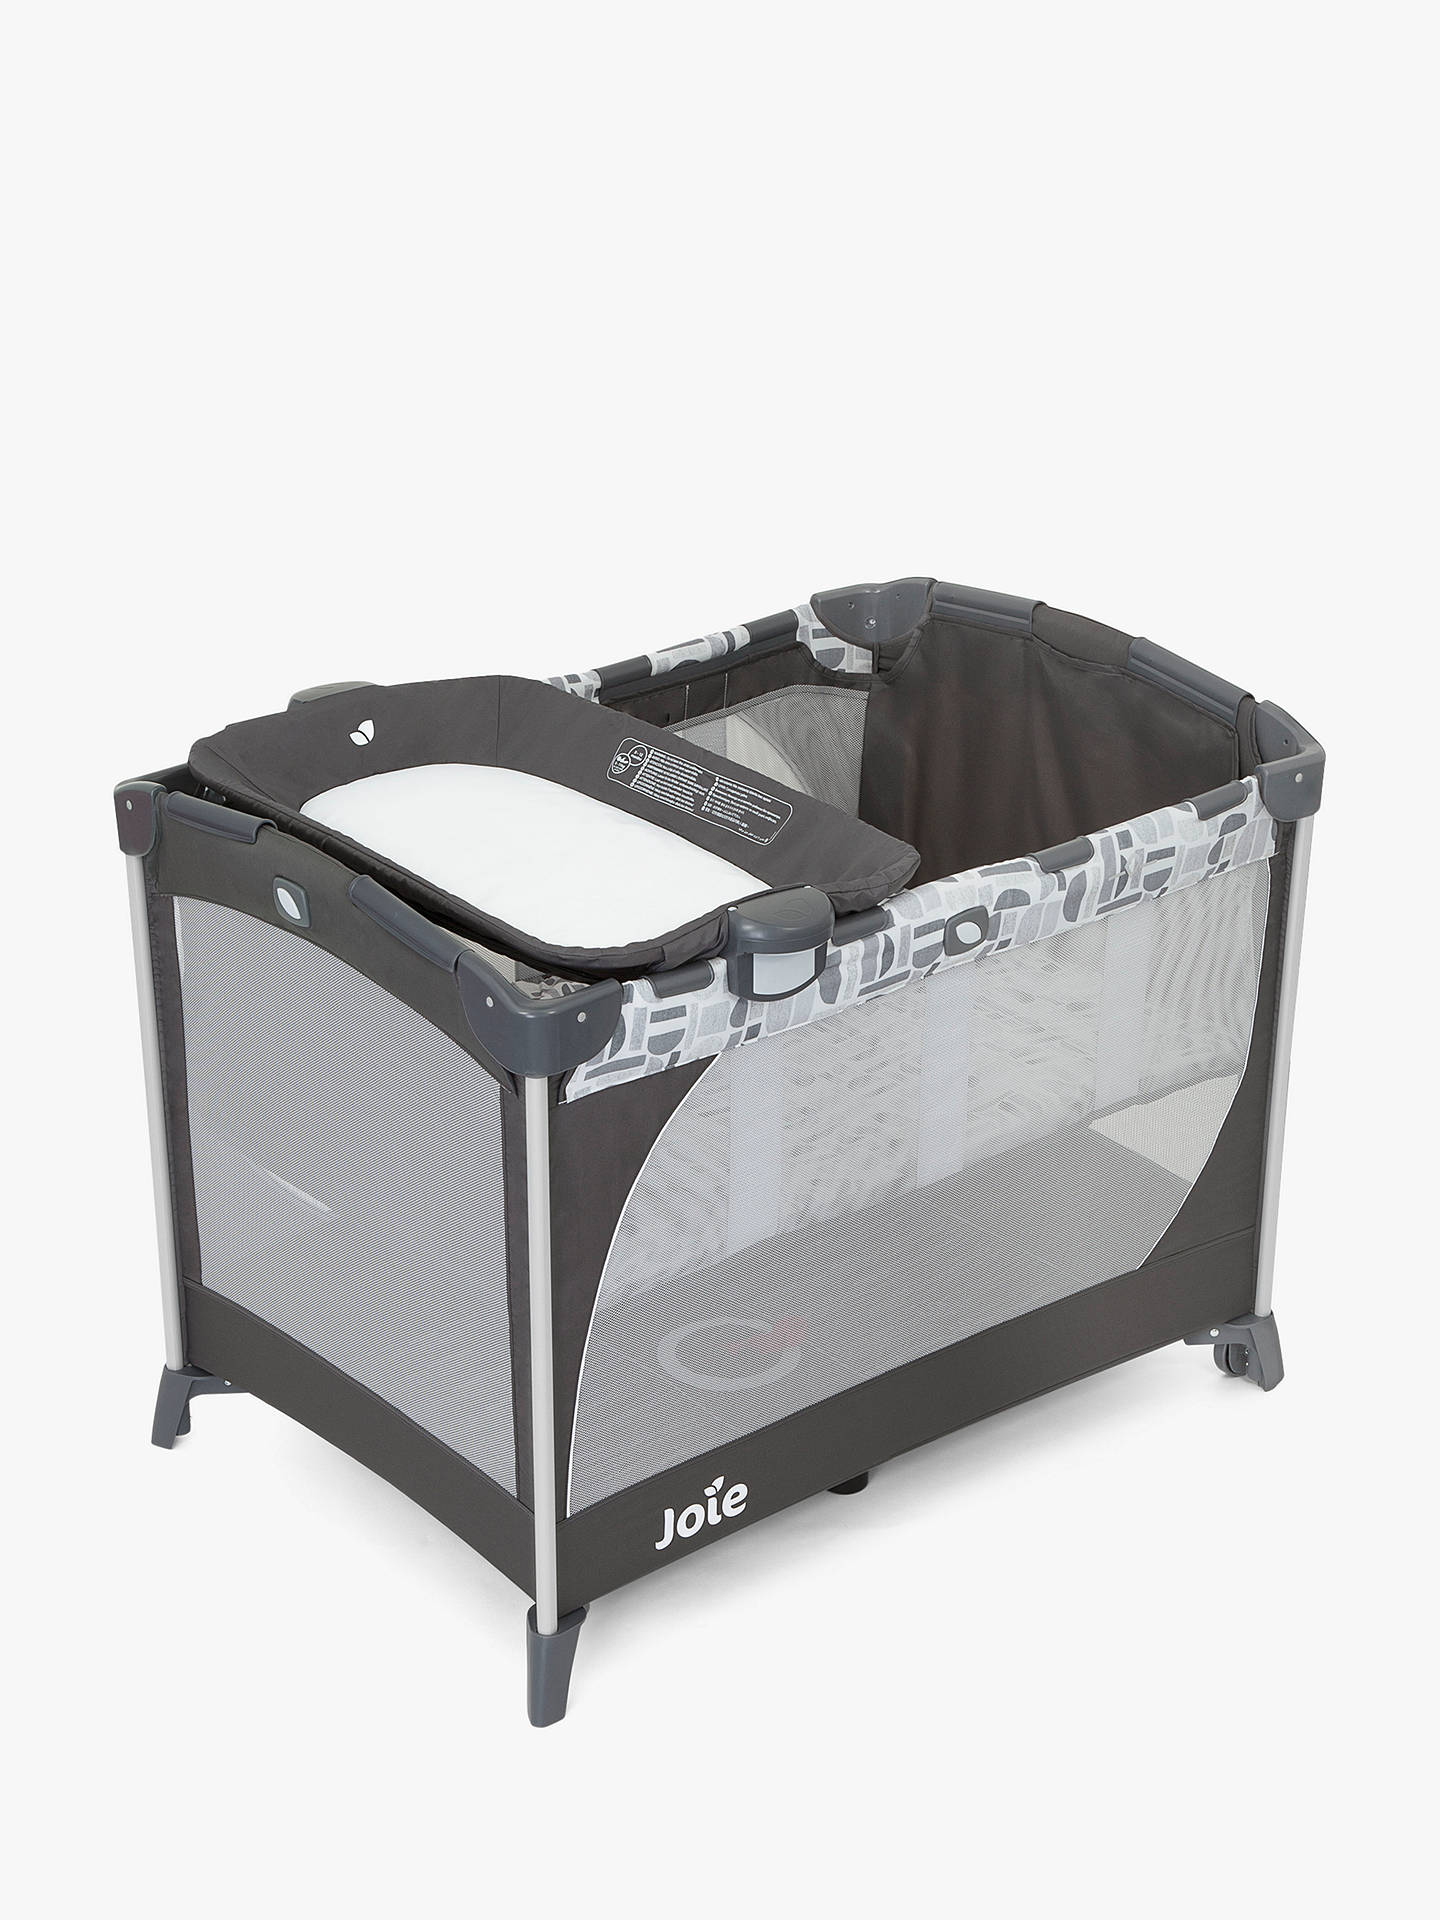 joie travel cot assembly